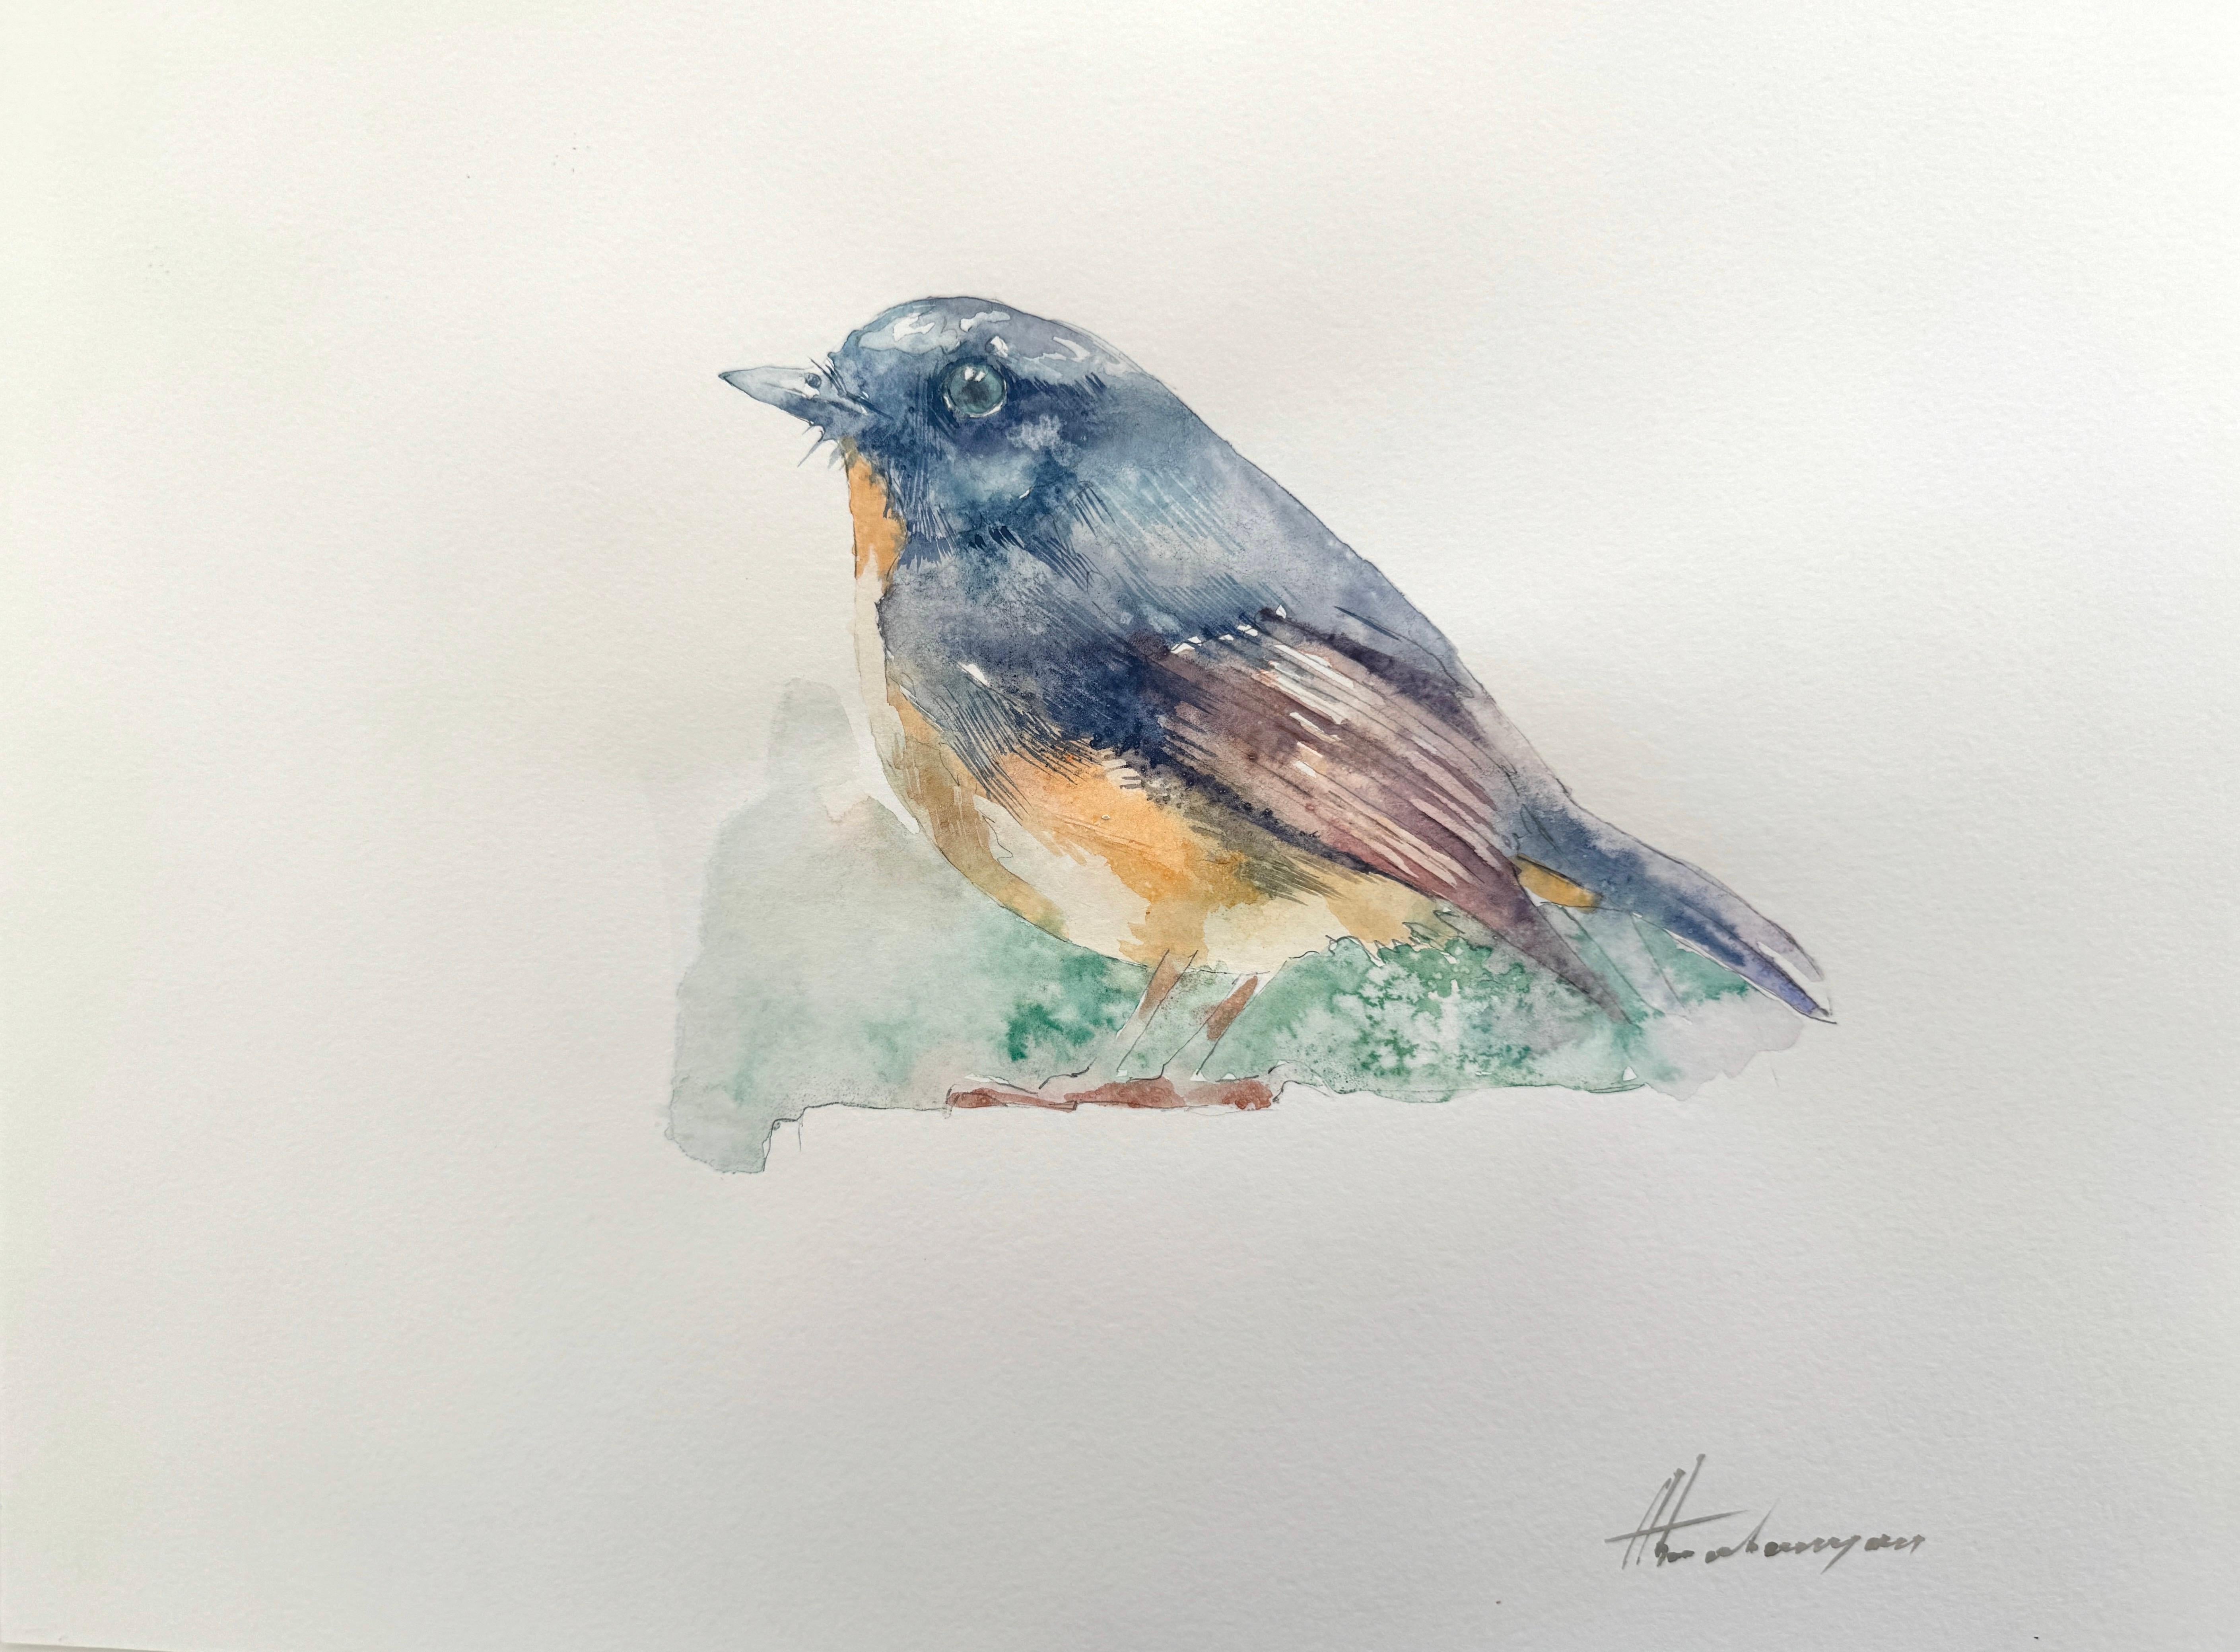 Blue-tail, Bird, Watercolor on Paper, Handmade Painting, One of a Kind